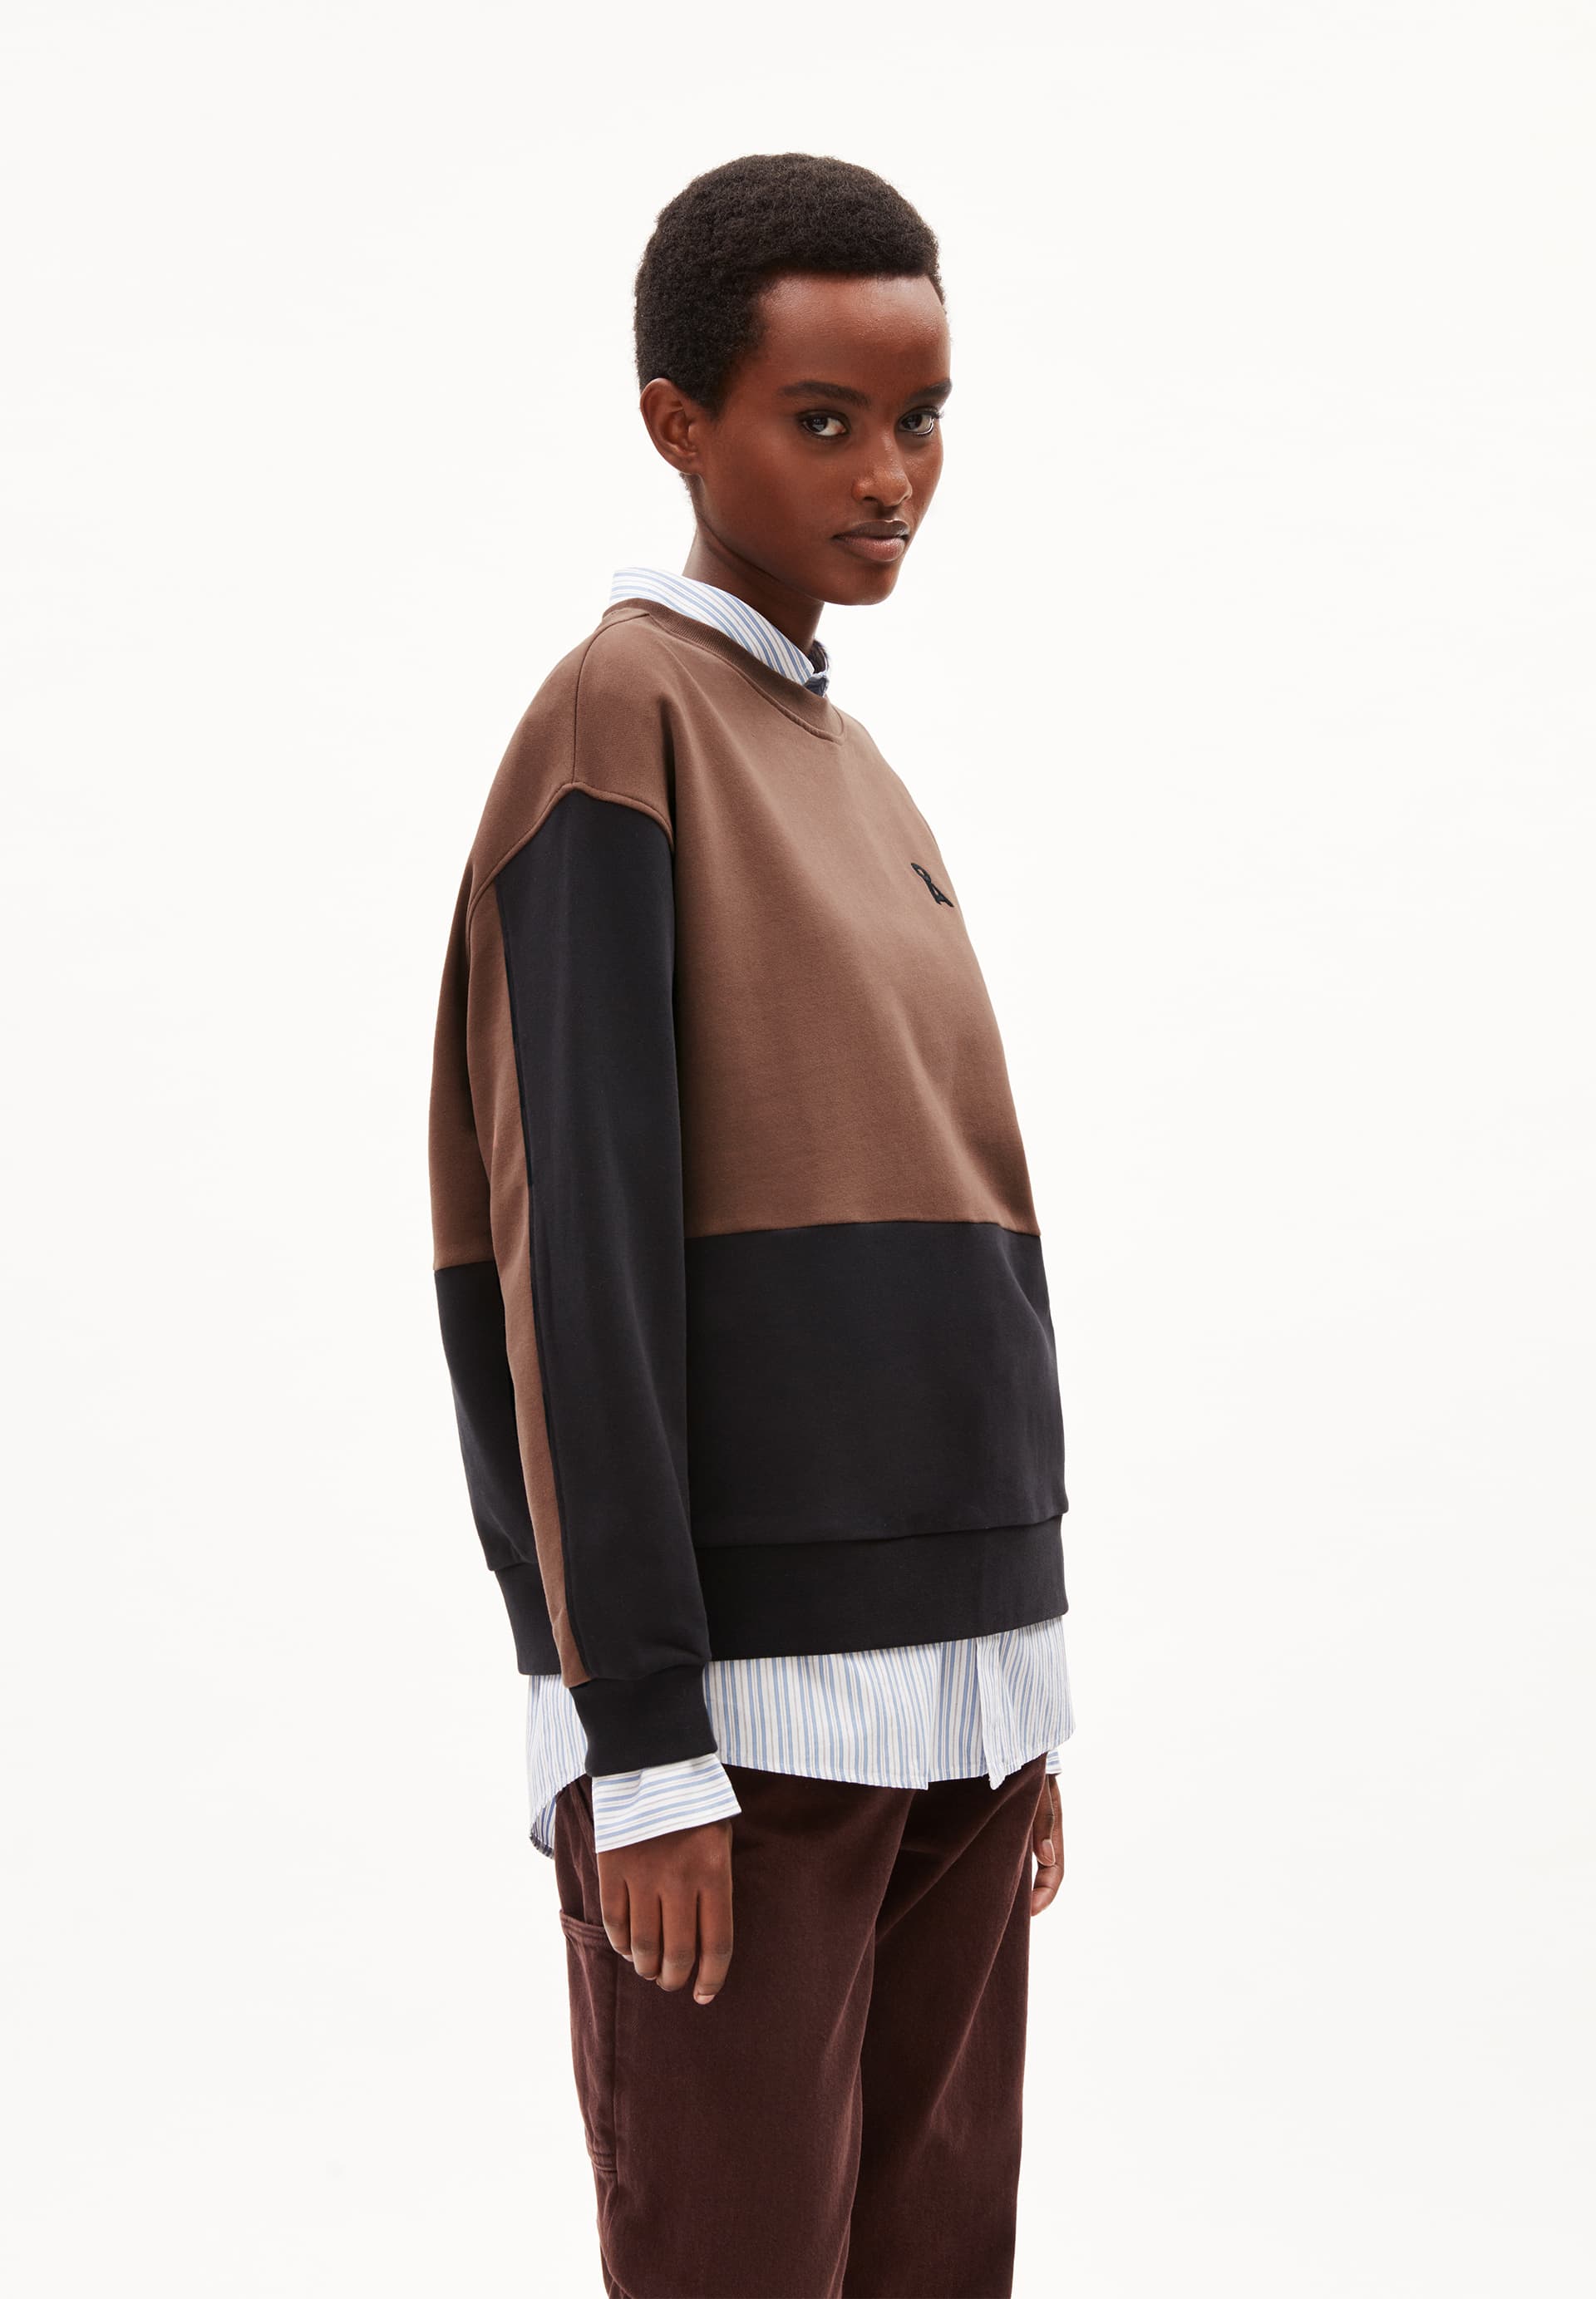 AARIN PATCHED Sweatshirt Oversized Fit made of Organic Cotton